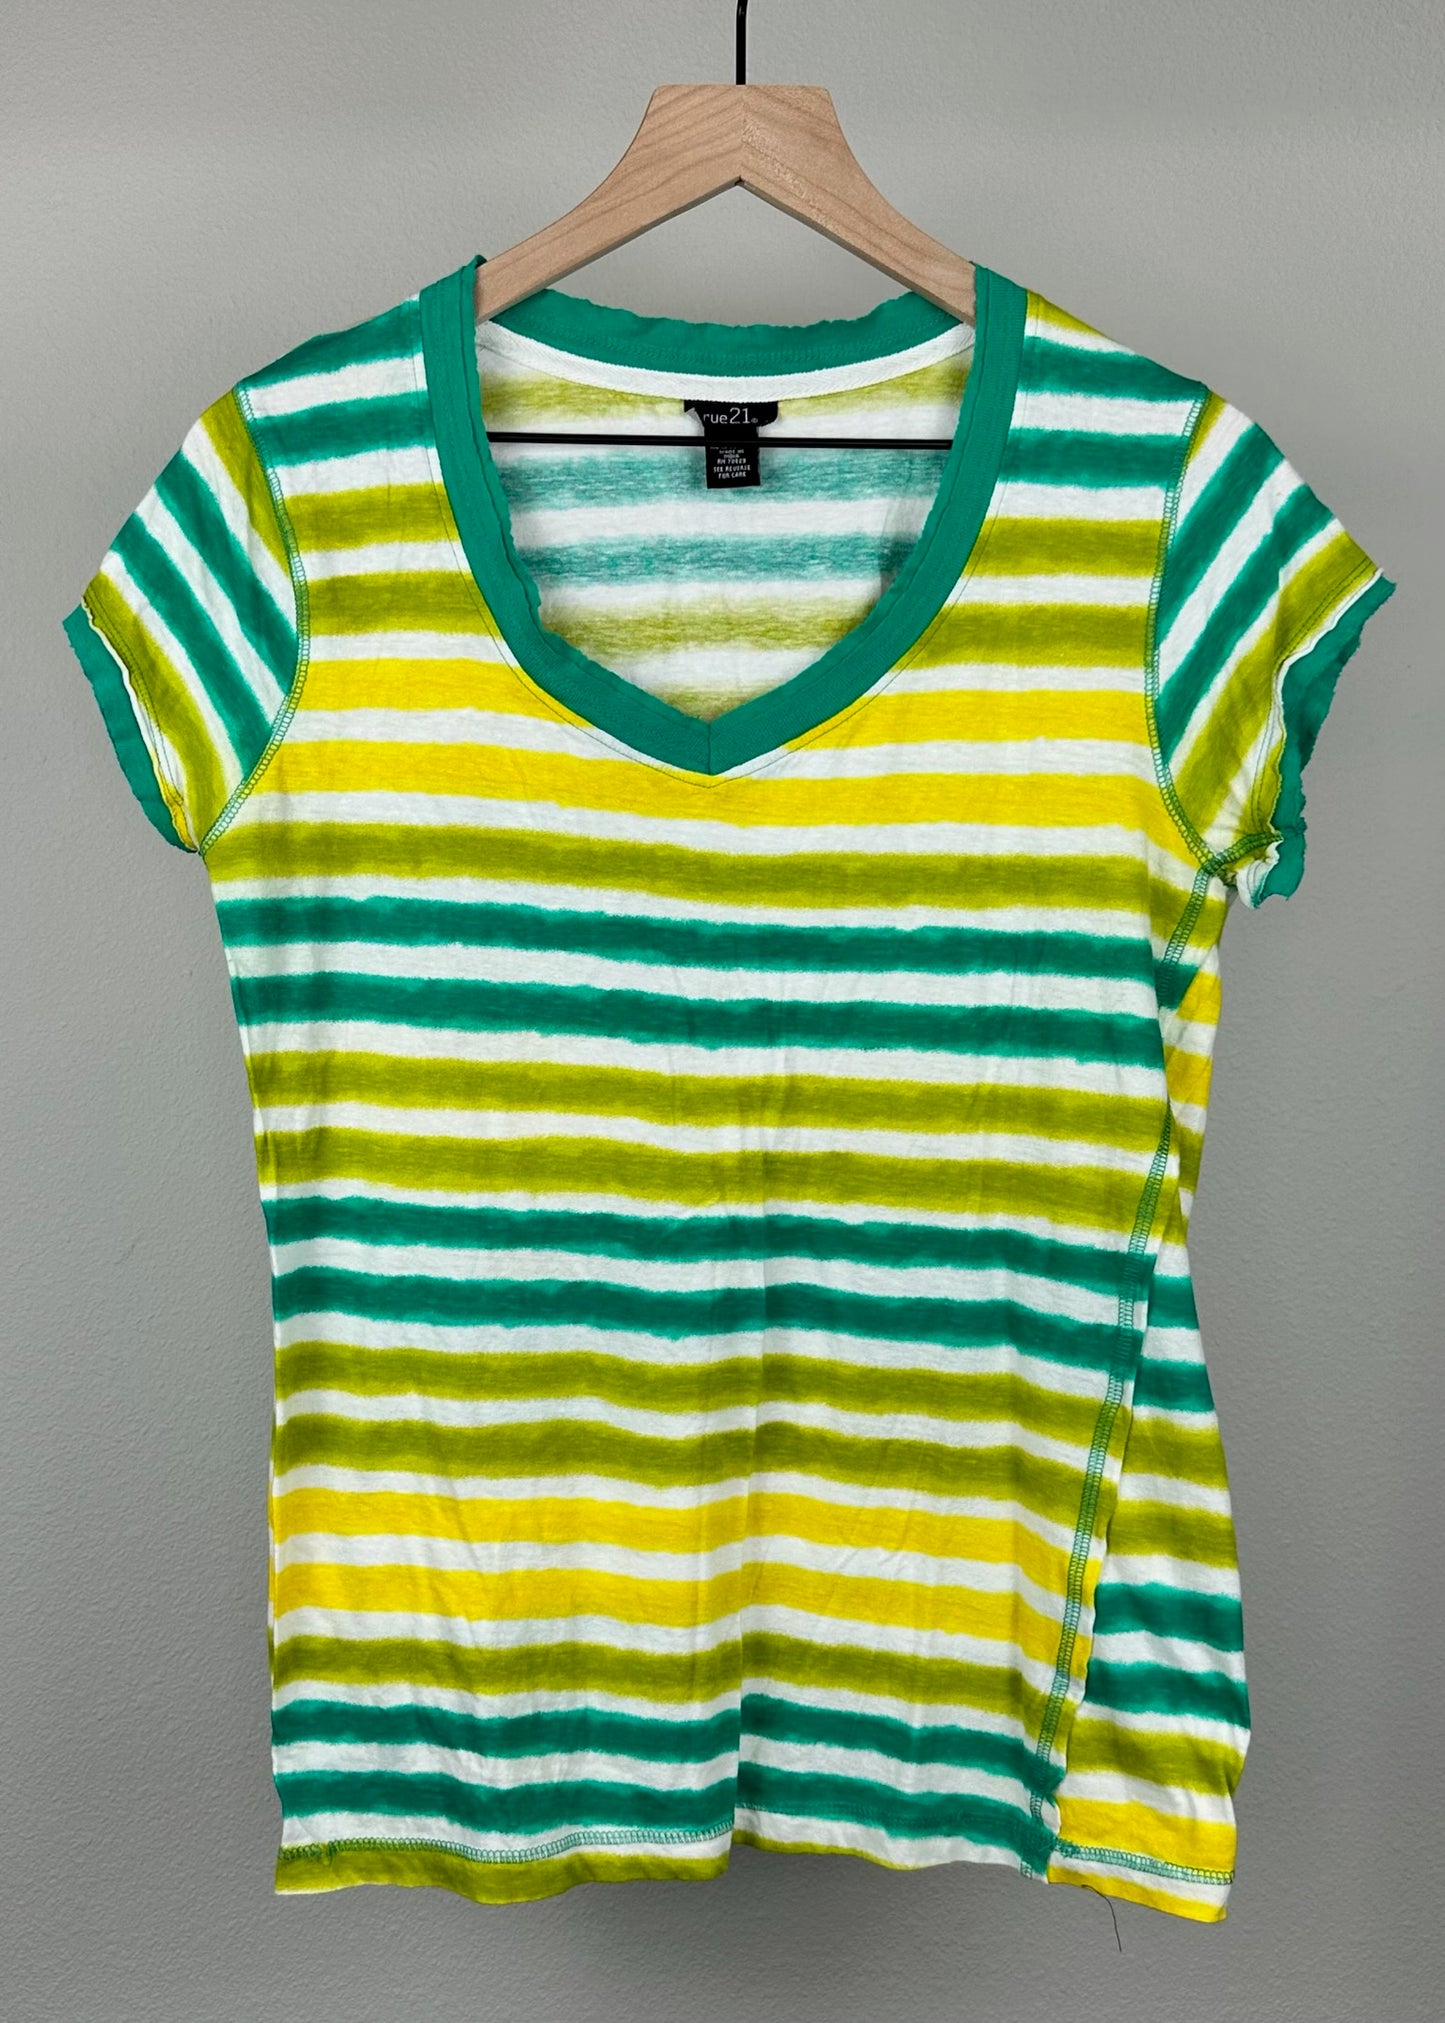 Green and Yellow Shirt by Rue 21